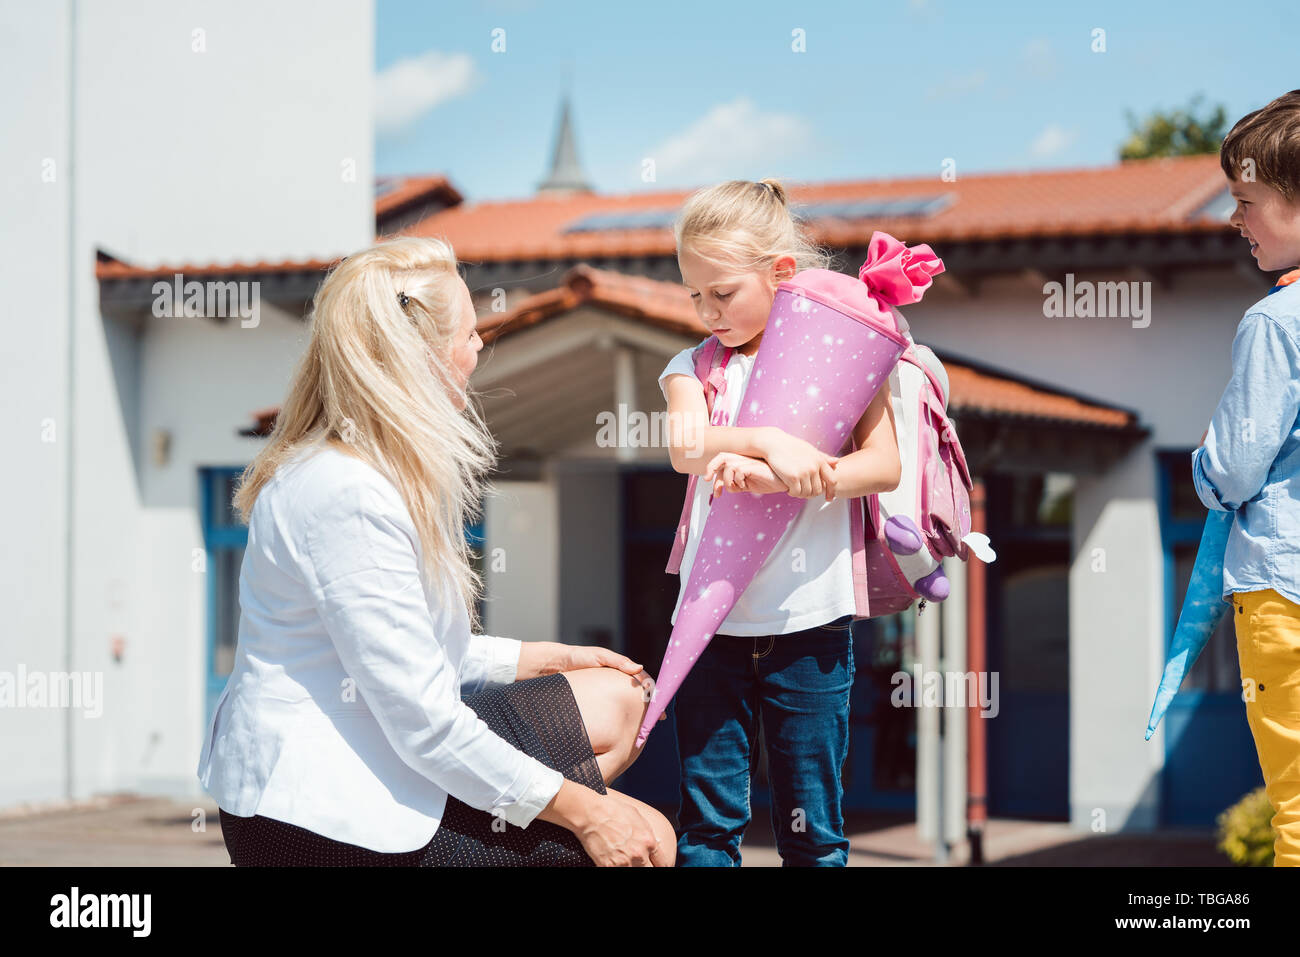 First day in school for little girl Stock Photo